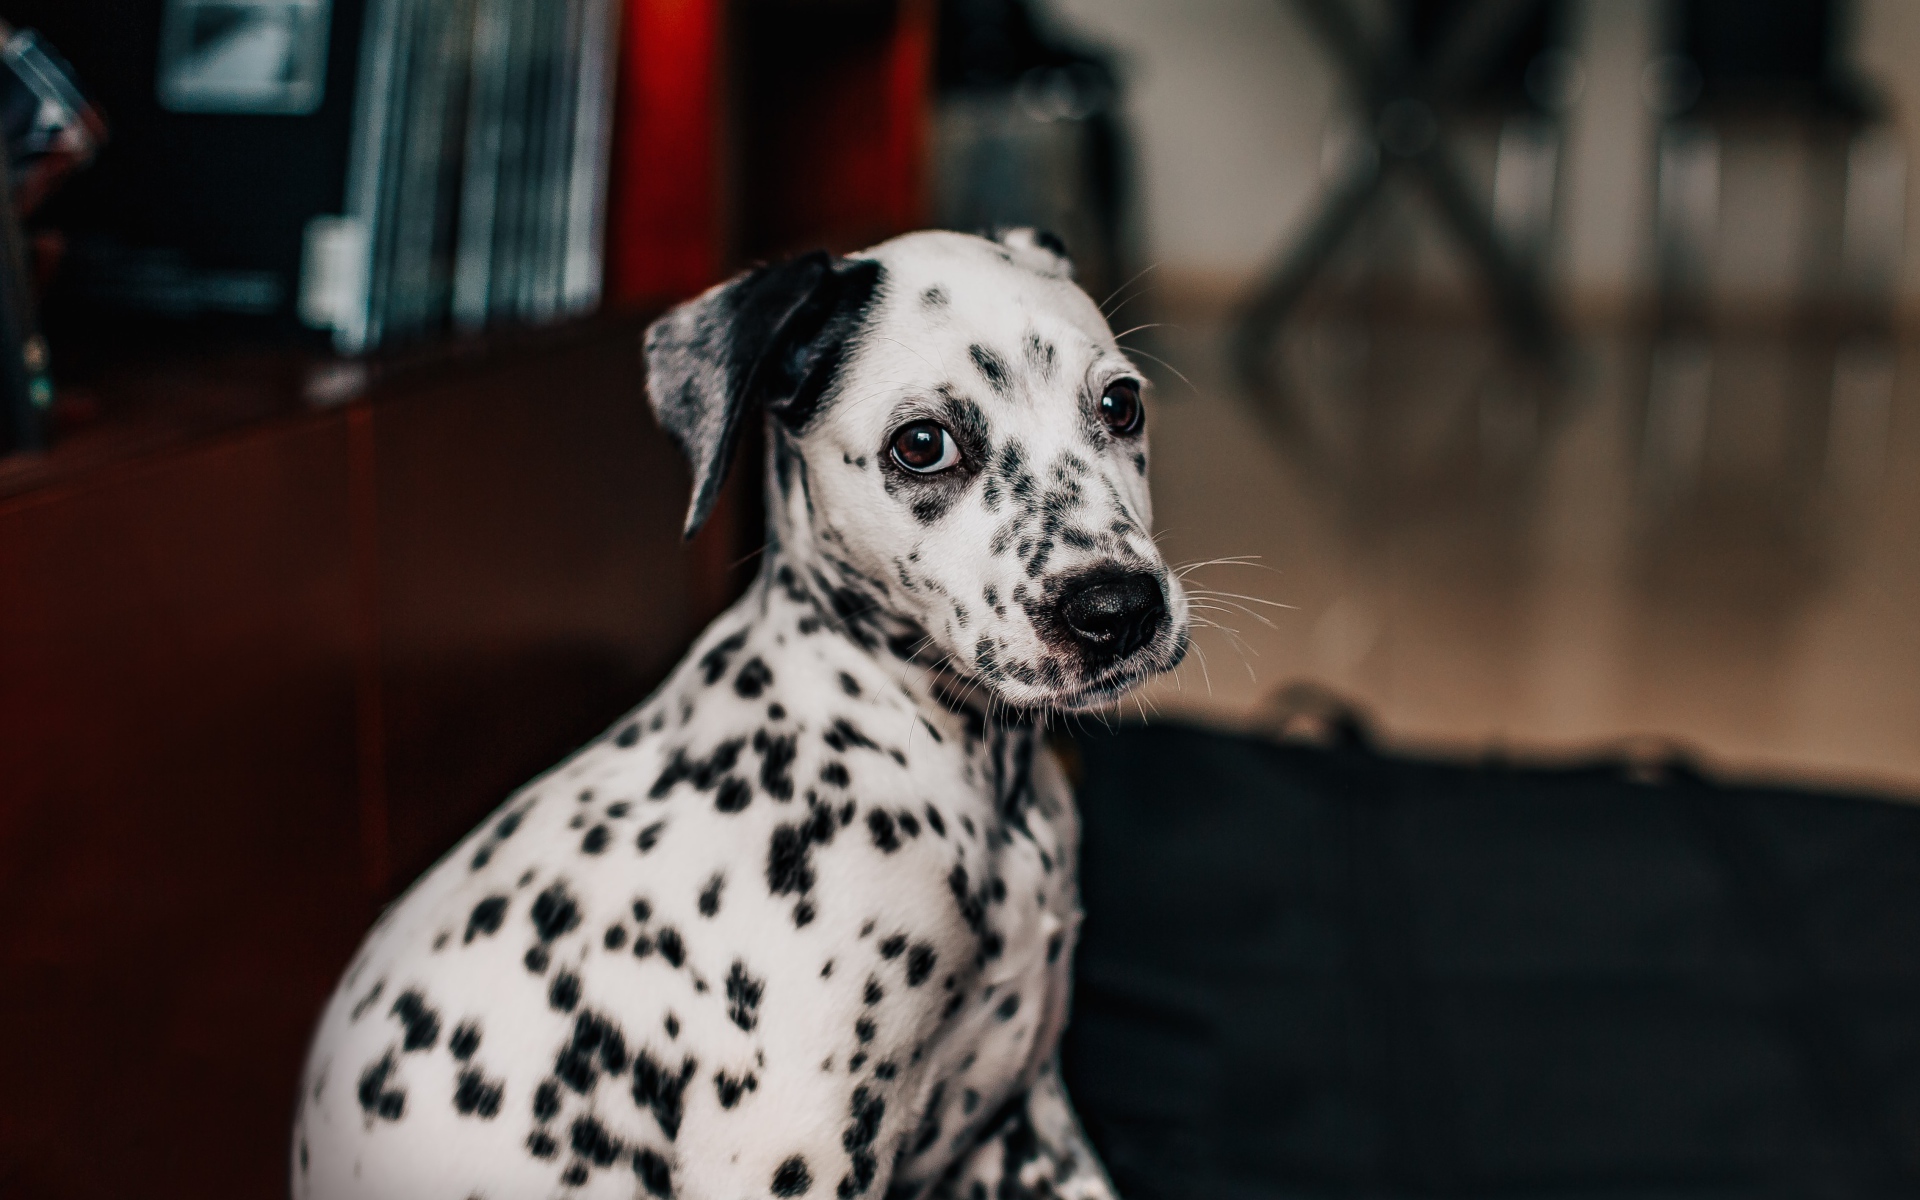 Small spotted dalmatian puppy